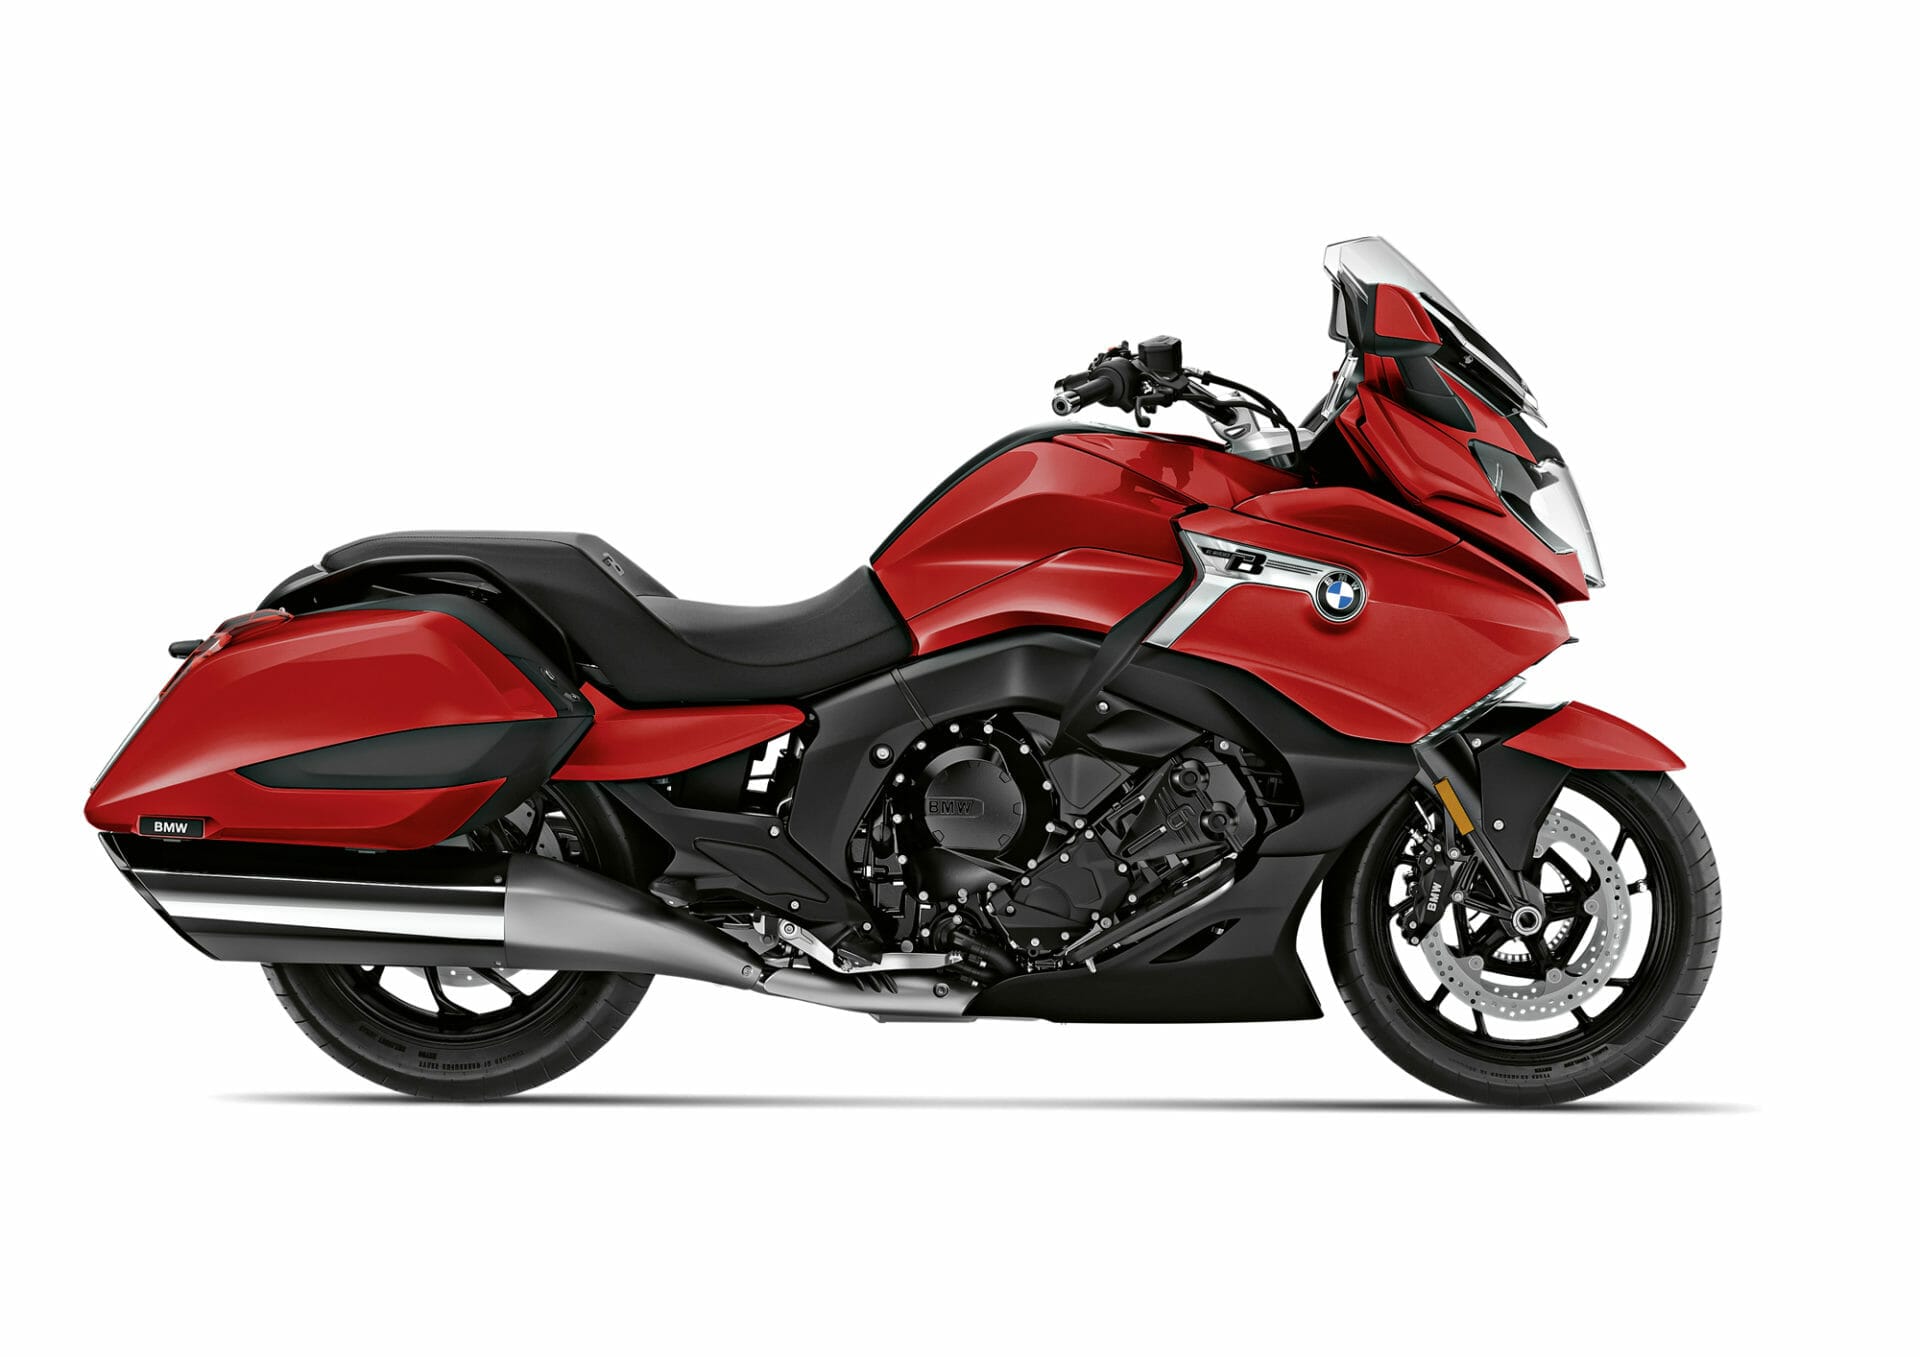 Recall BMW K 1600 models - link strut of the rear suspension may break
- also in the MOTORCYCLES.NEWS APP